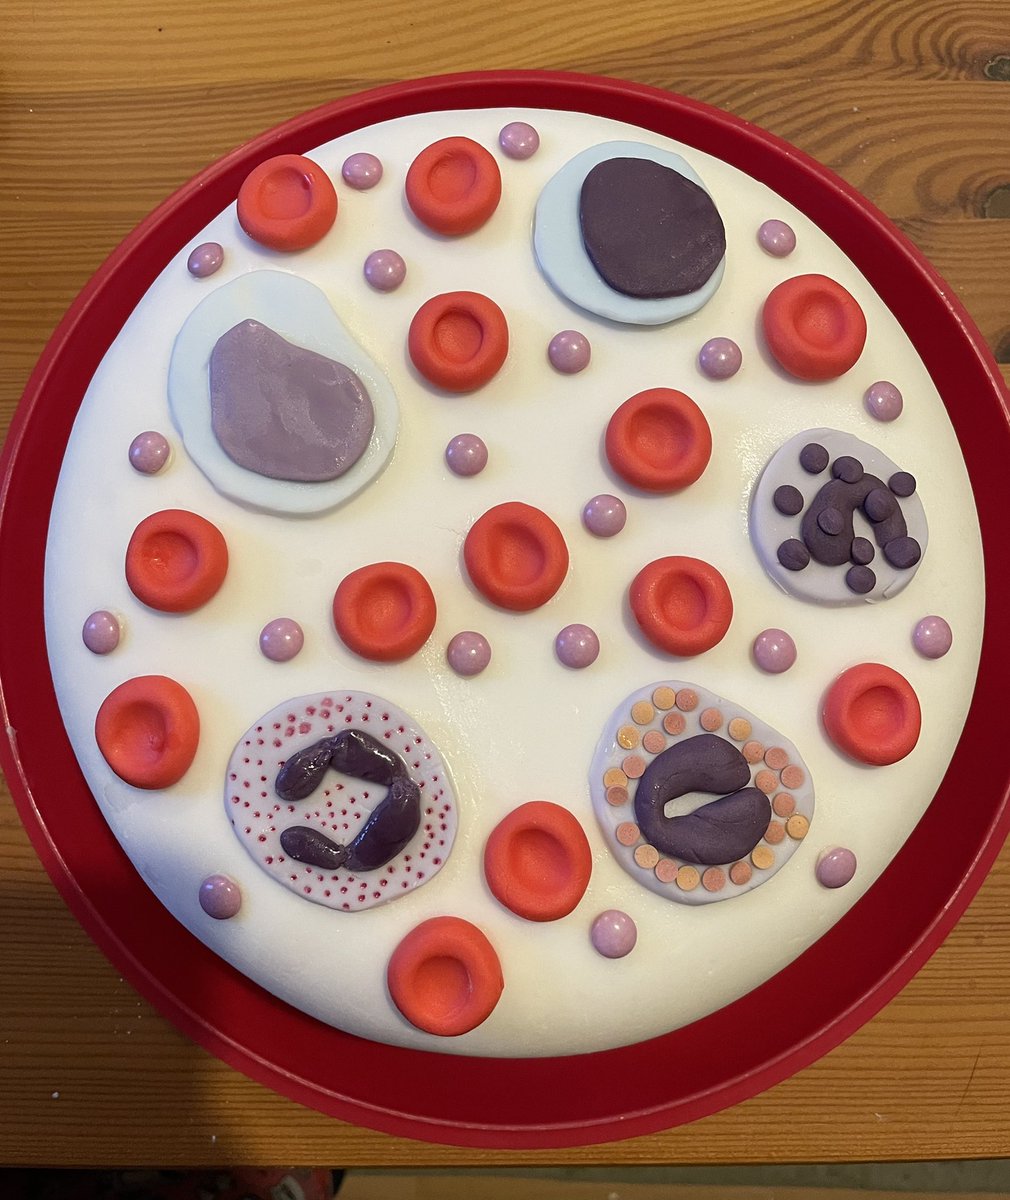 Happy #BiomedicalScienceDay2022. My friend and colleague, Rowena @Friday_17 made this amazing blood cell cake ☺ 🎂